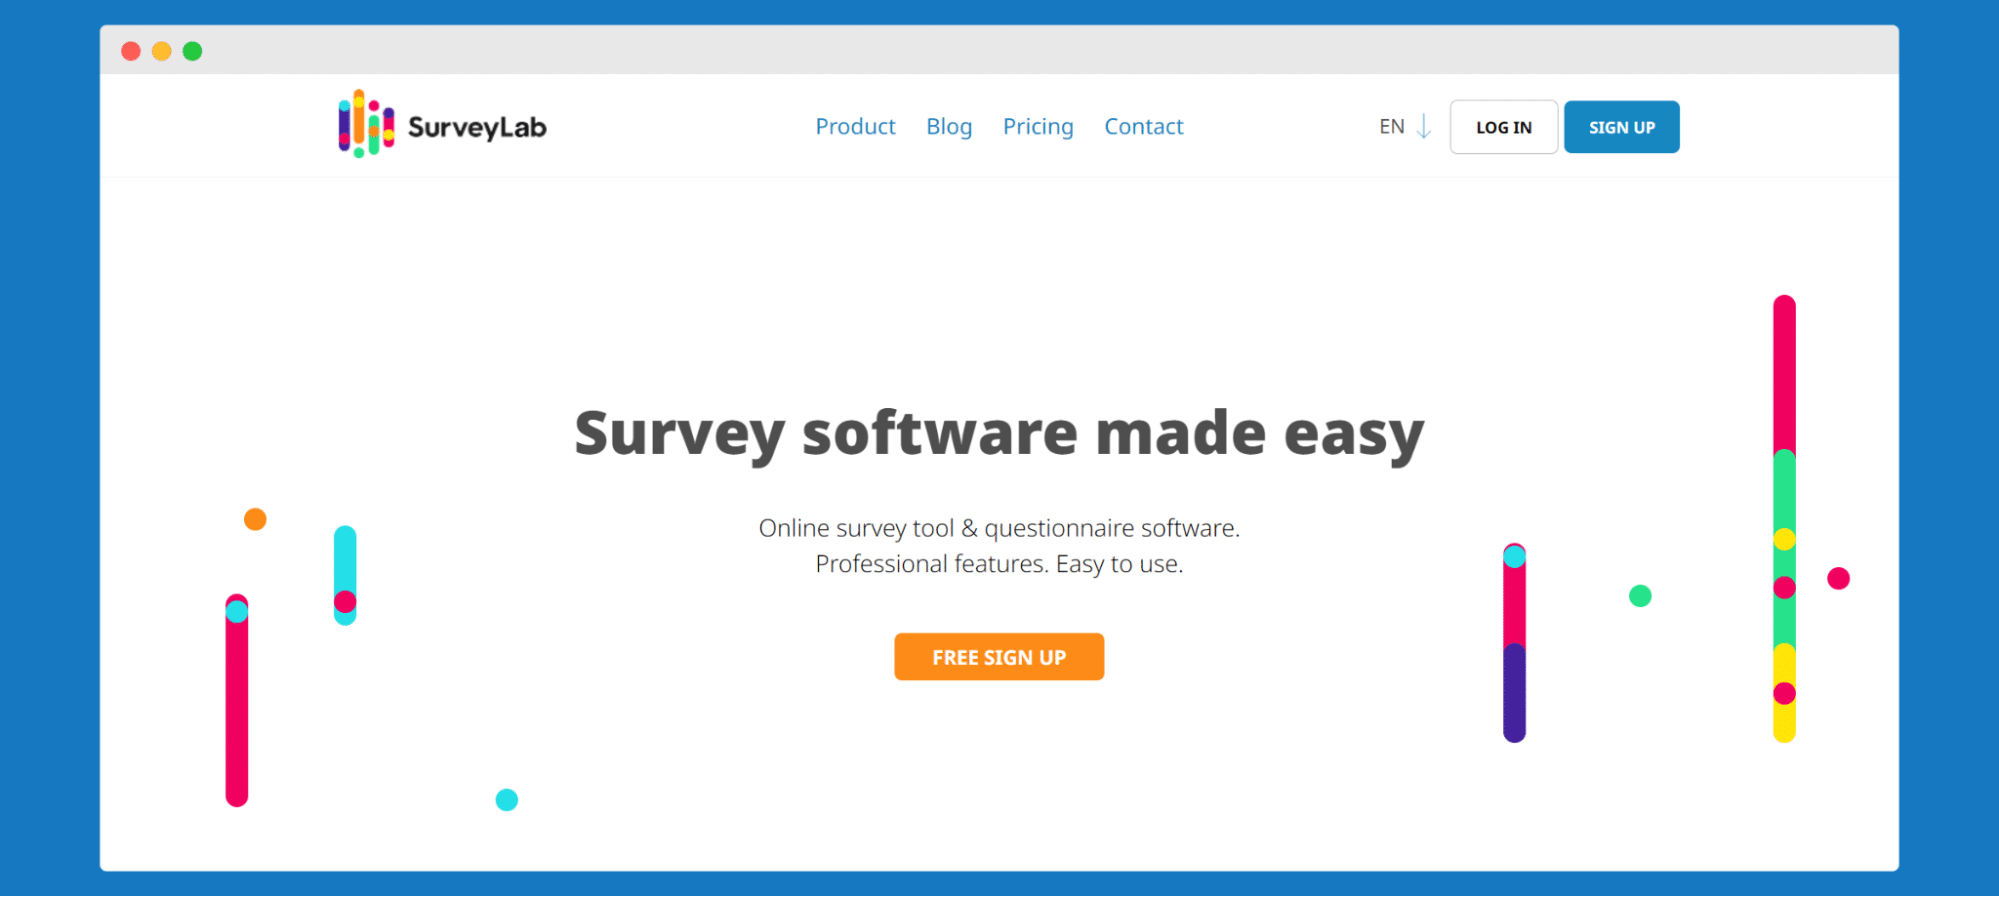 Surveylab - surveying tool with statistical analysis software capabilities